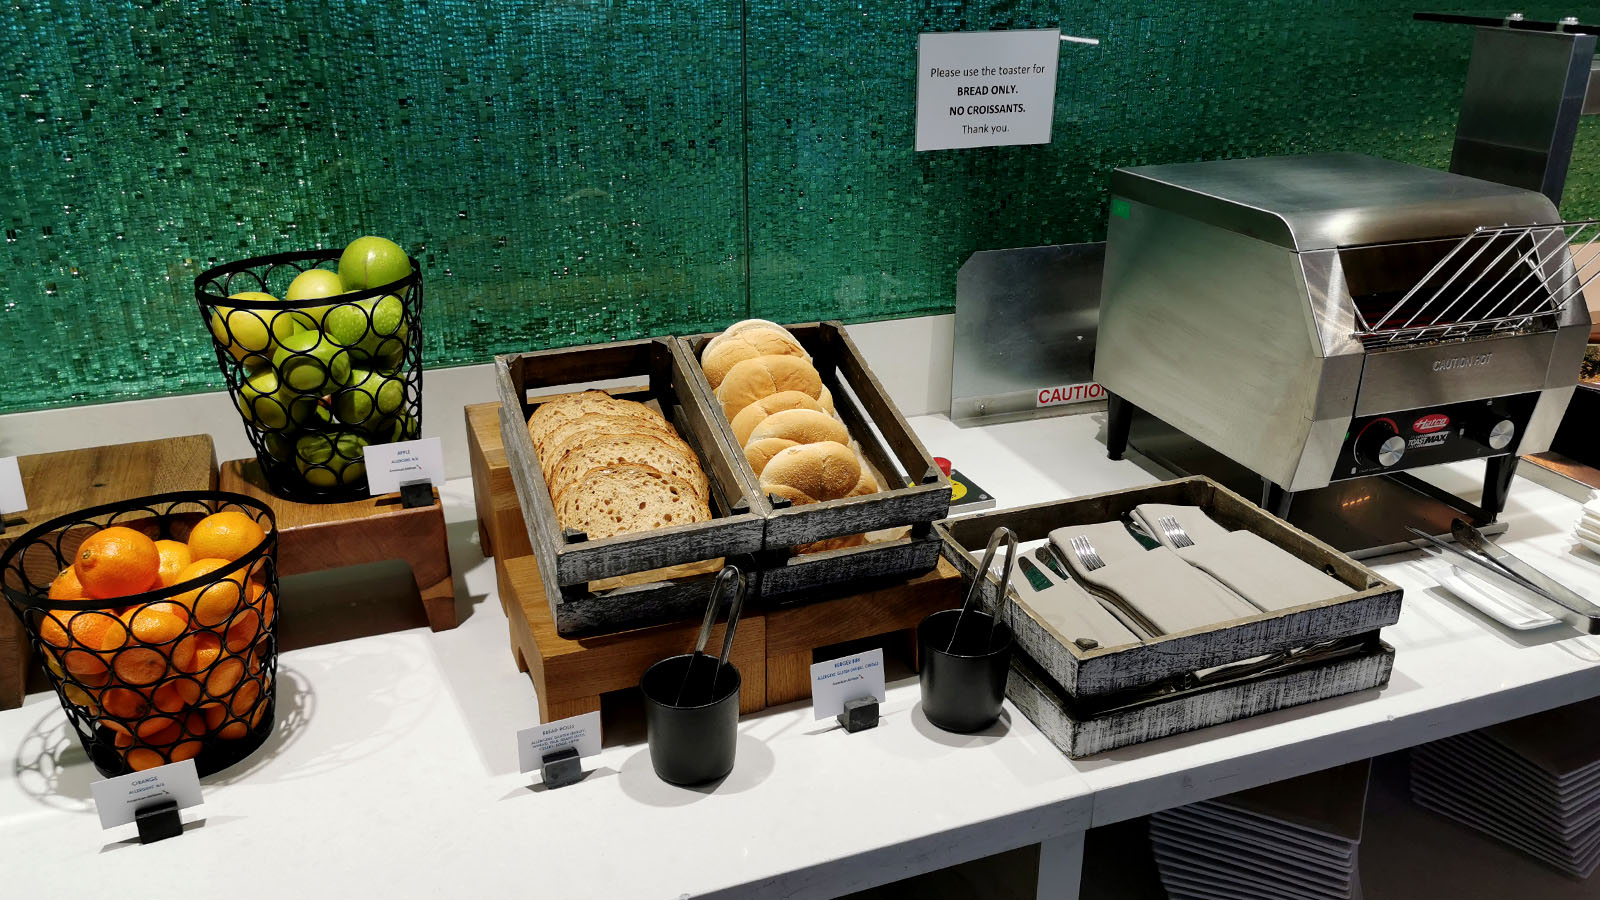 Breads in the American Airlines Arrivals Lounge at London Heathrow